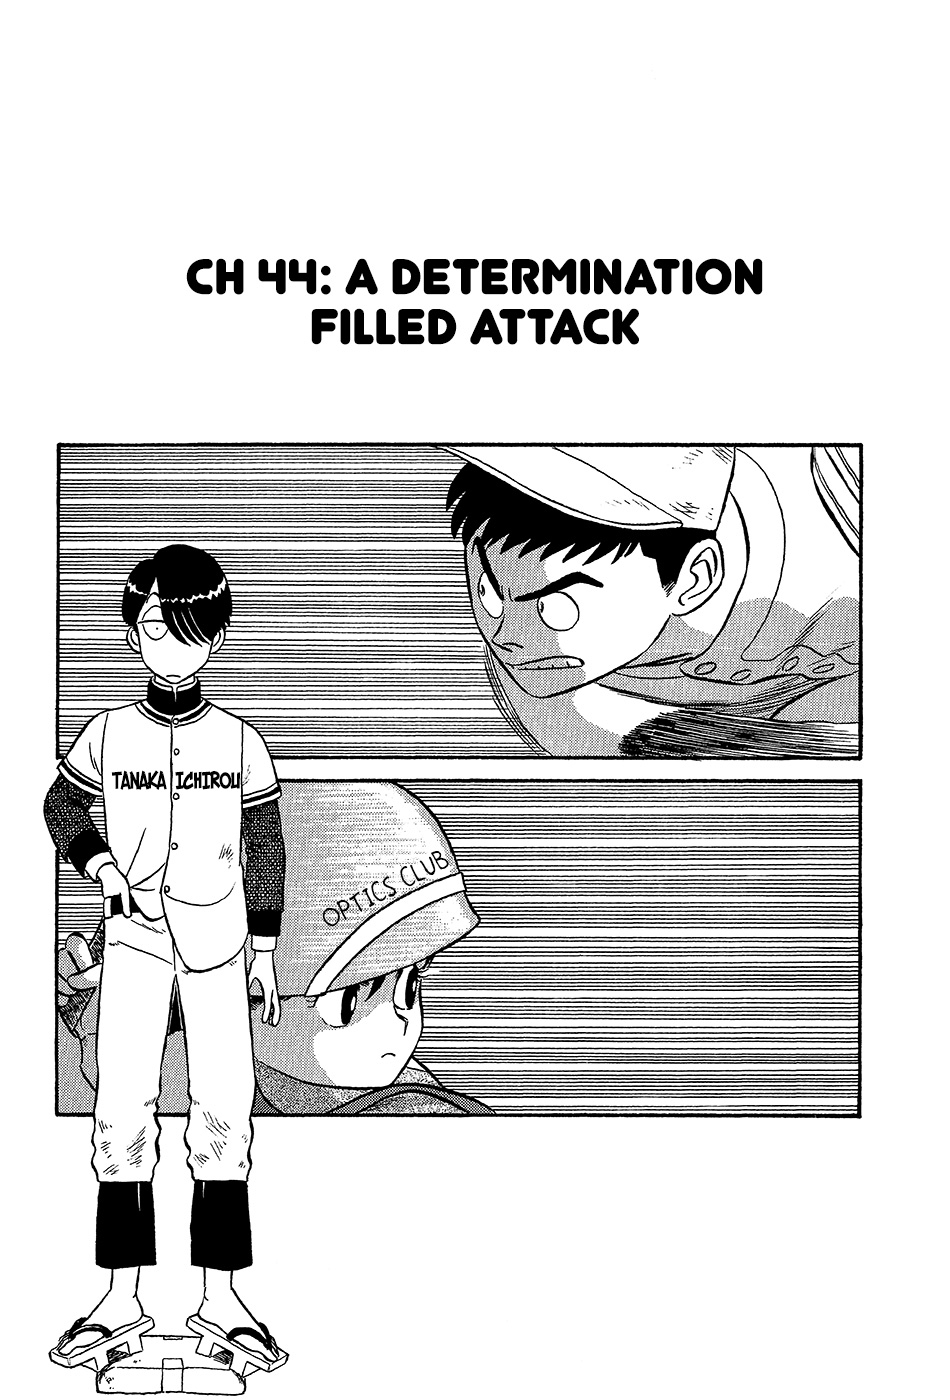 Kyuukyoku Choujin R Vol.4 Chapter 44: A Determination Filled Attack - Picture 2